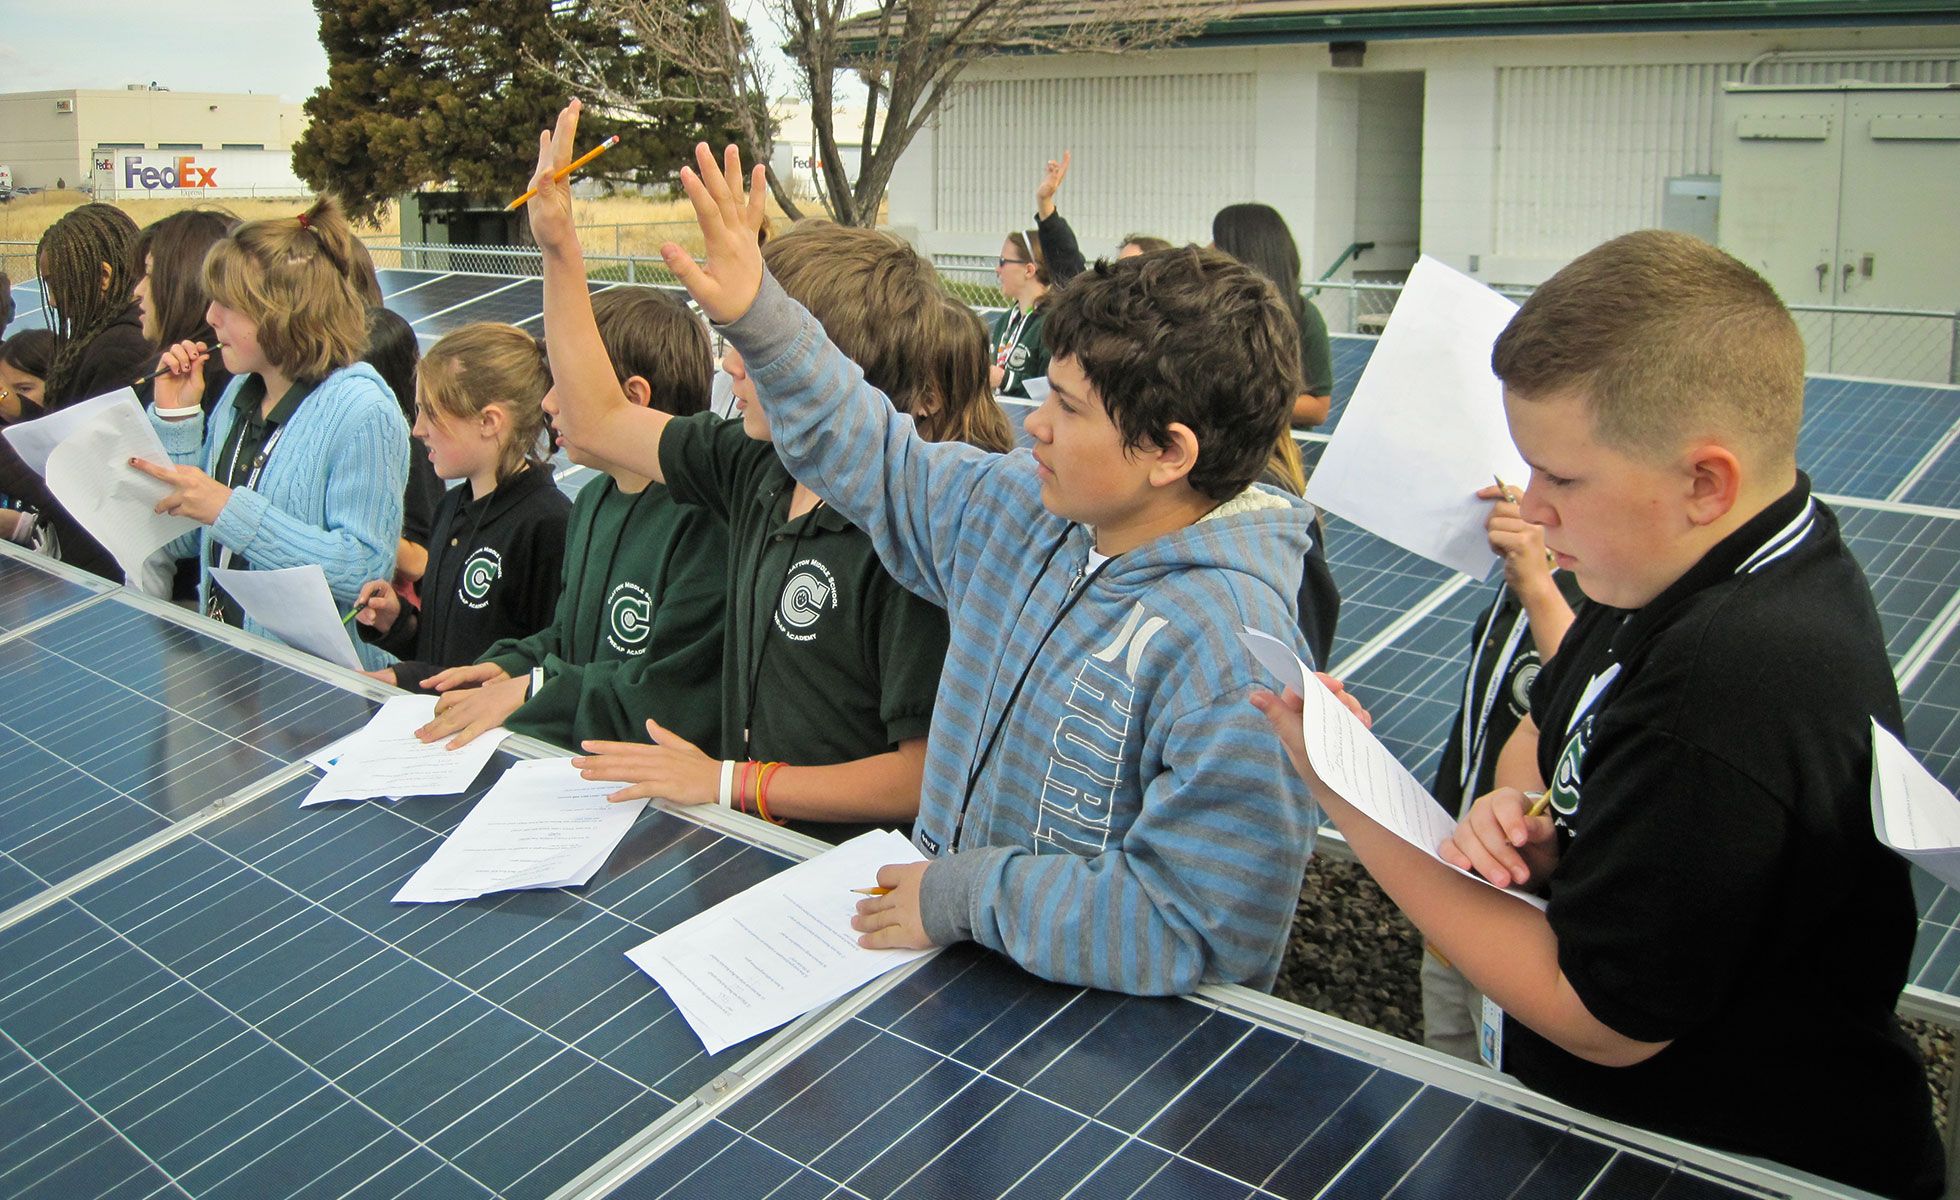 Students learn about solar energy